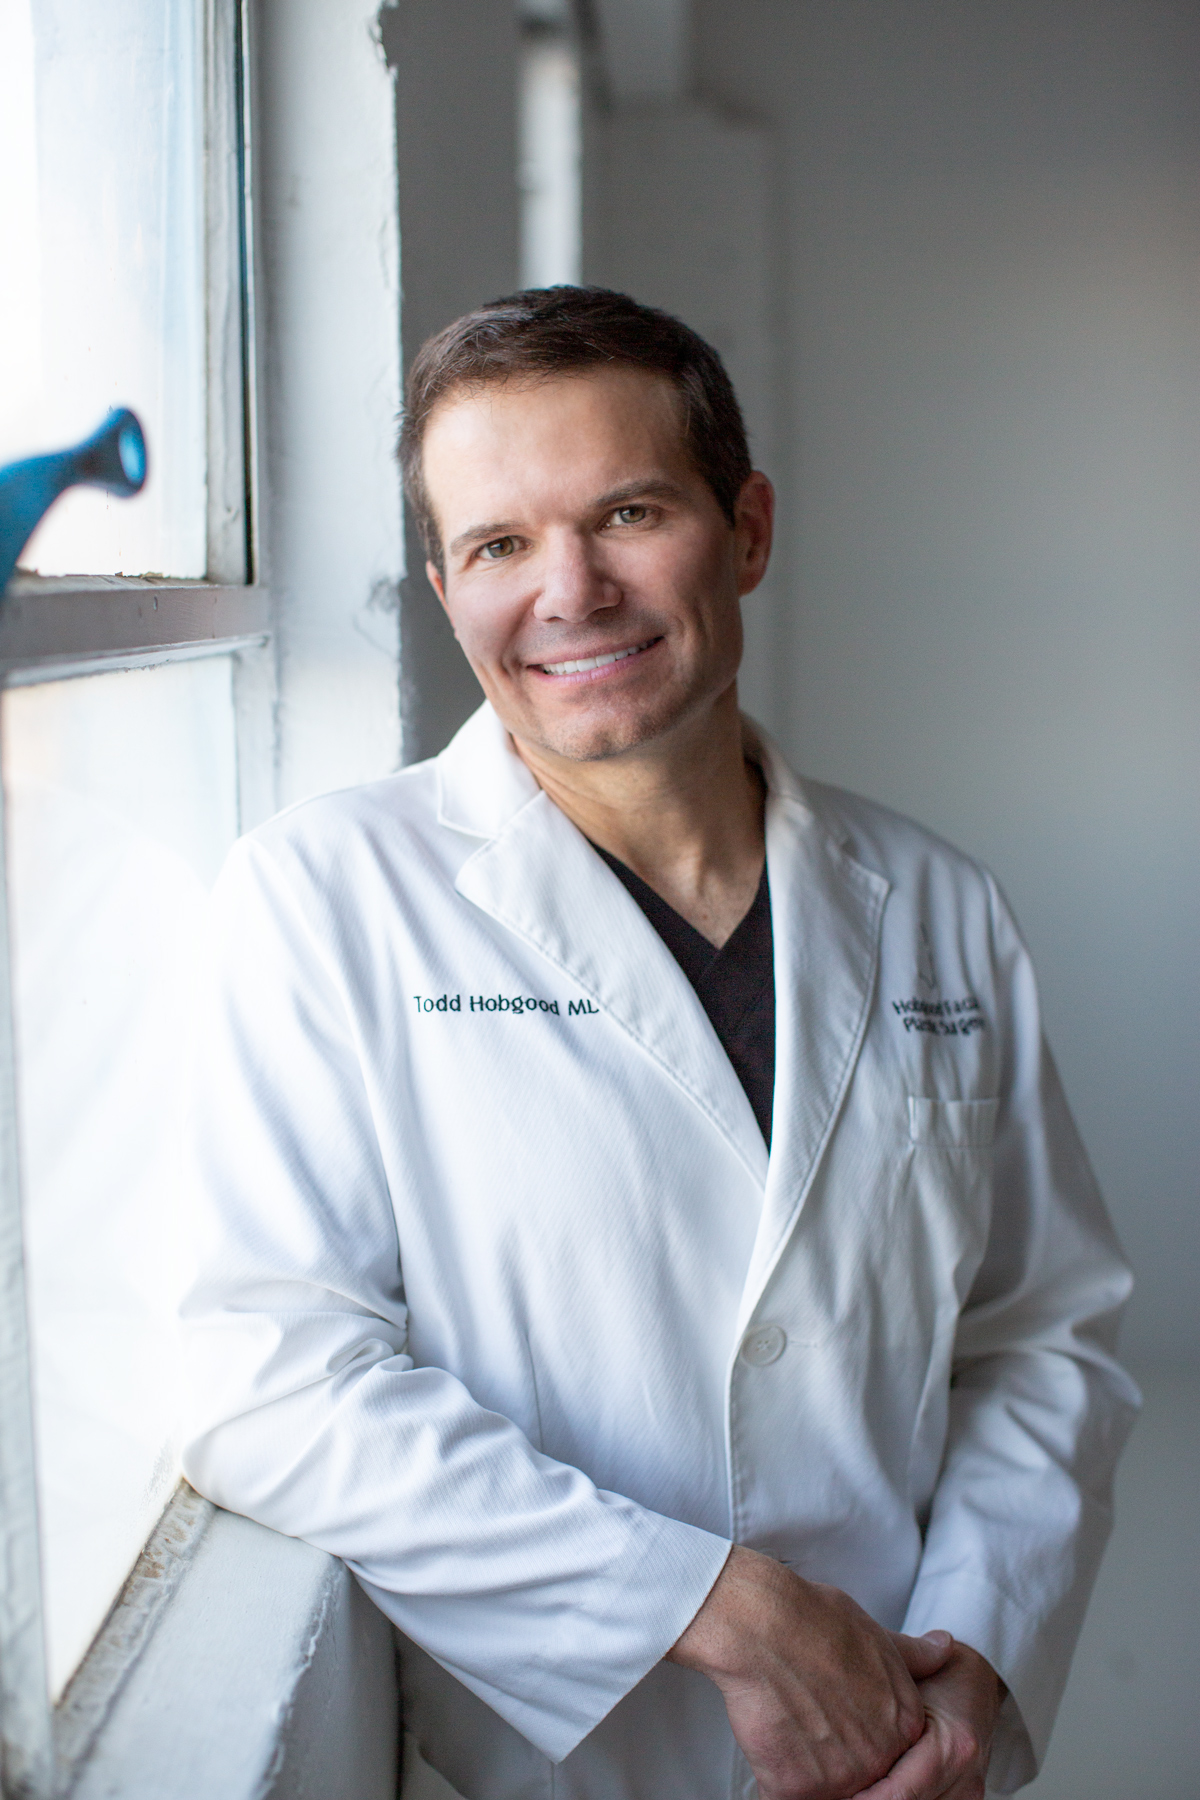 Double Board Certified Plastic Surgeon Dr. Todd Hobgood